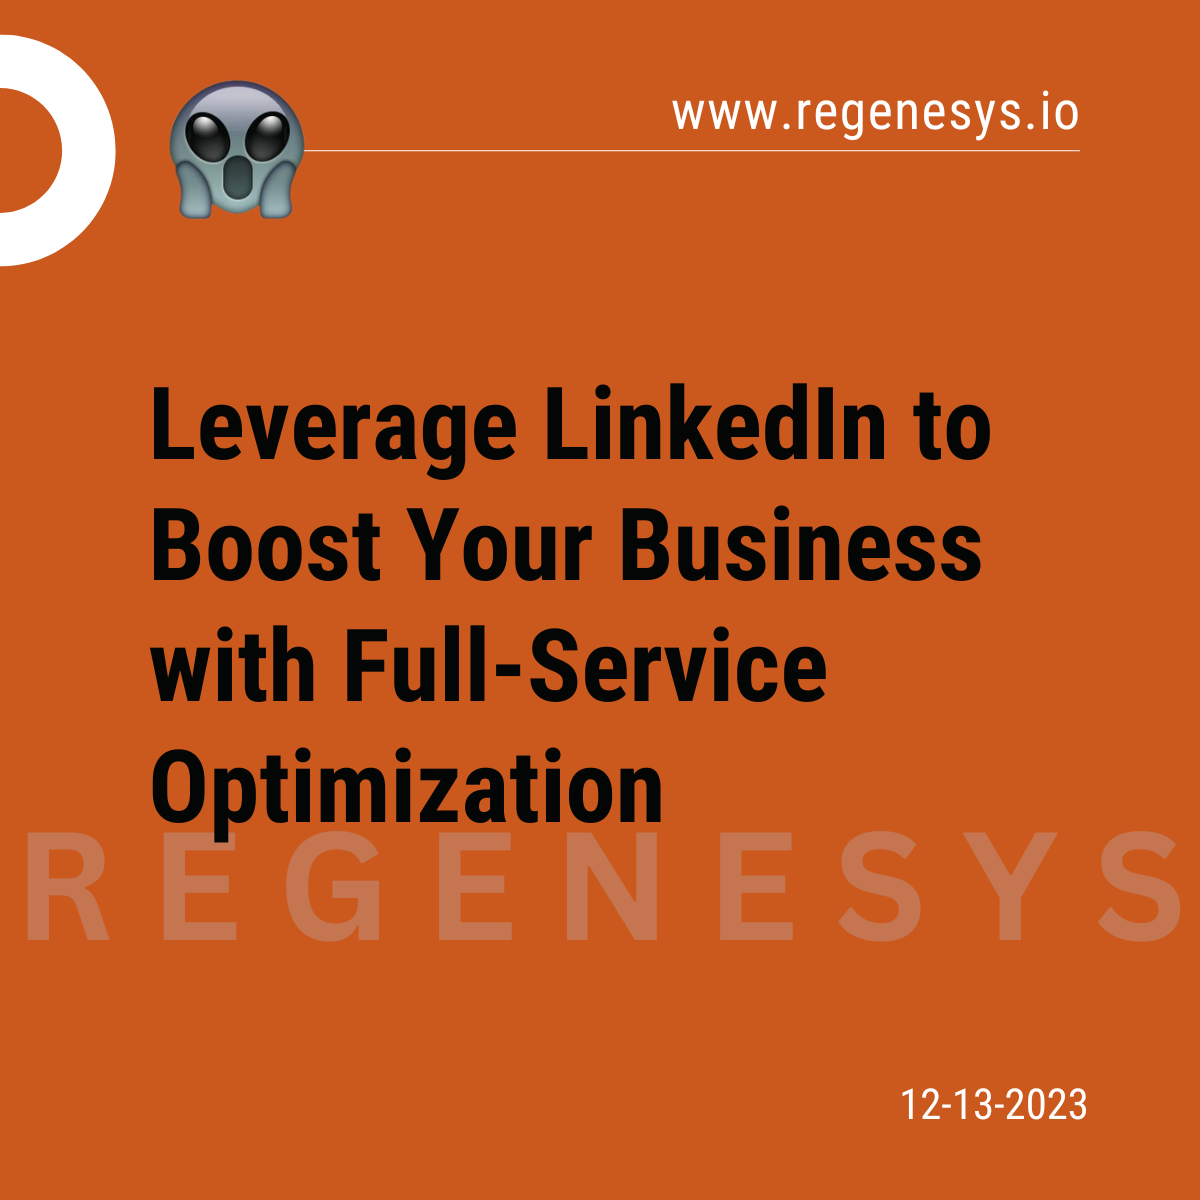 Leverage LinkedIn to Boost your business with Full-Service Optimization